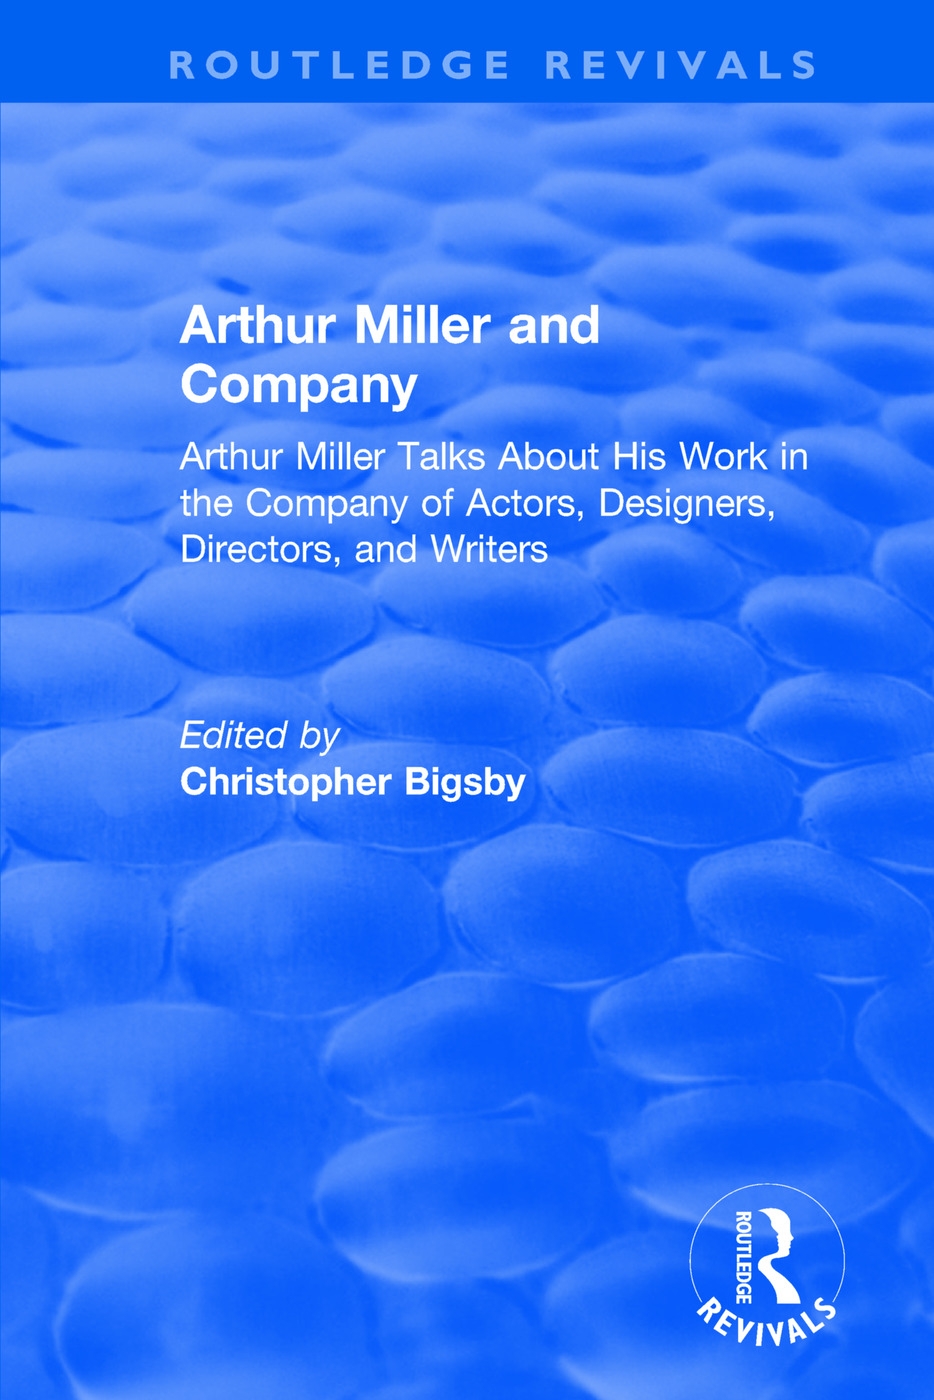 Routledge Revivals: Arthur Miller and Company (1990): Arthur Miller Talks about His Work in the Company of Actors, Designers, Directors, and Writers